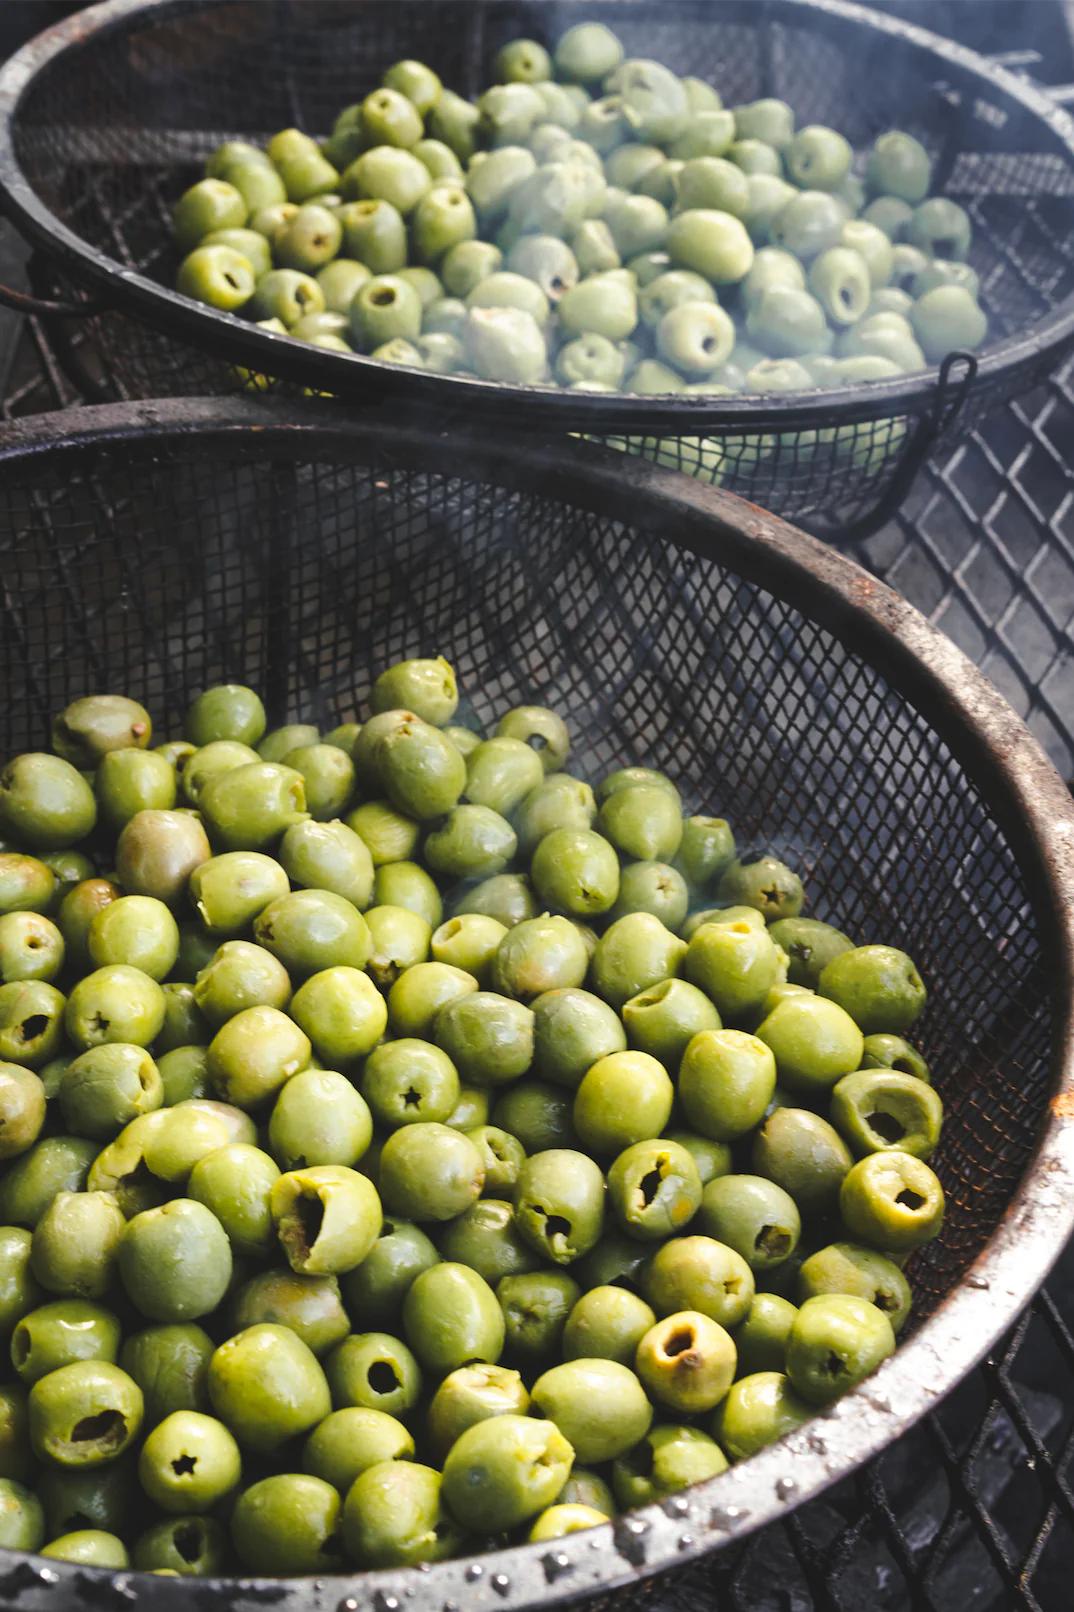 where to buy smoked olives - What are the healthiest olives to buy